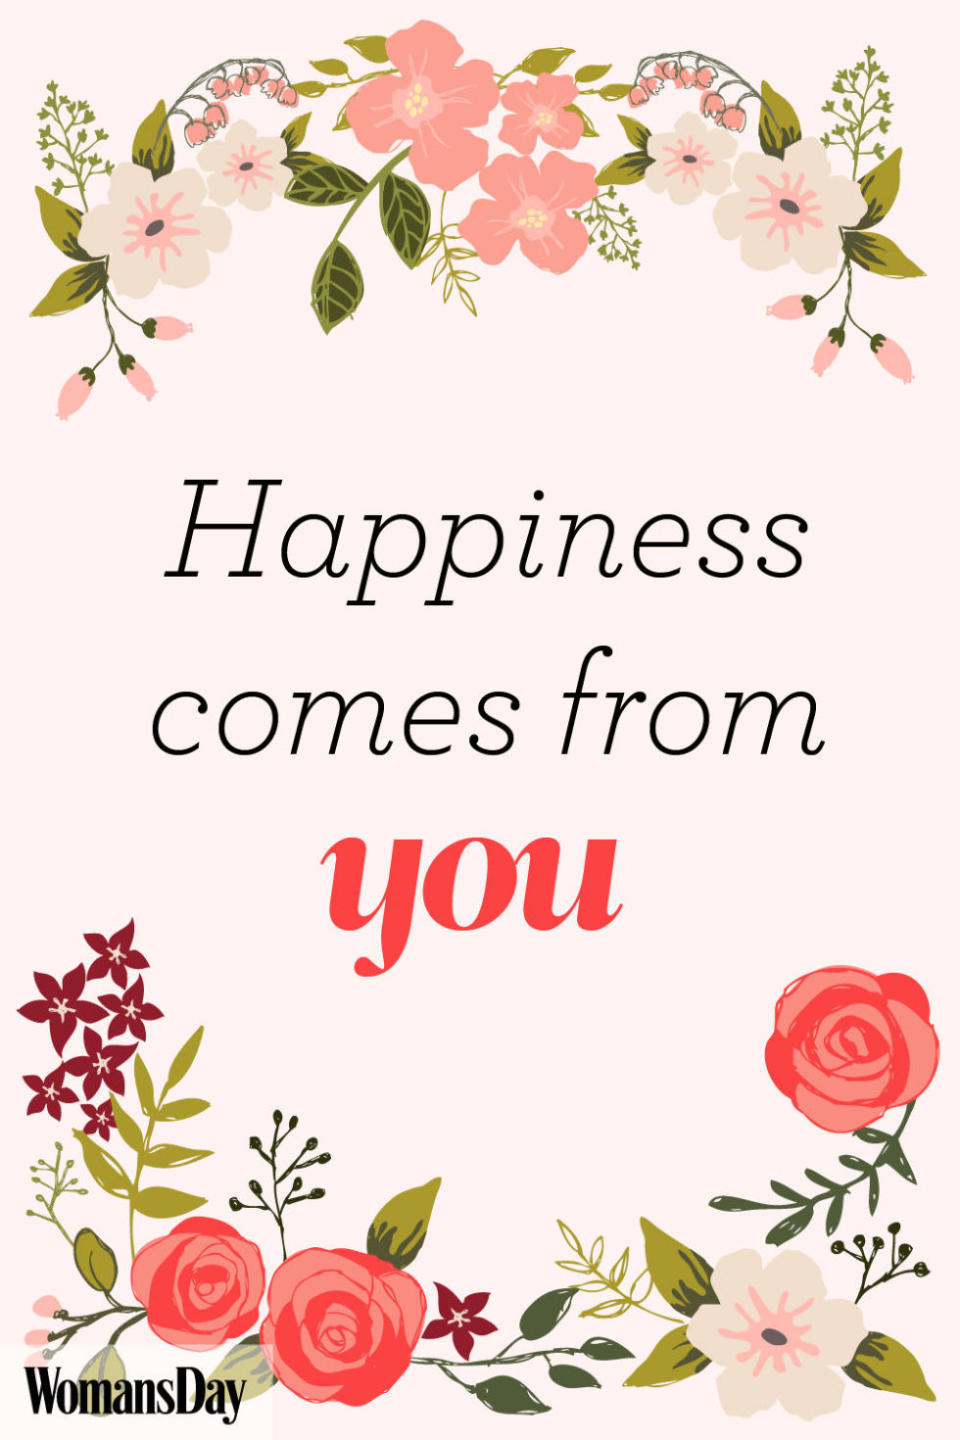 Happiness comes from you.